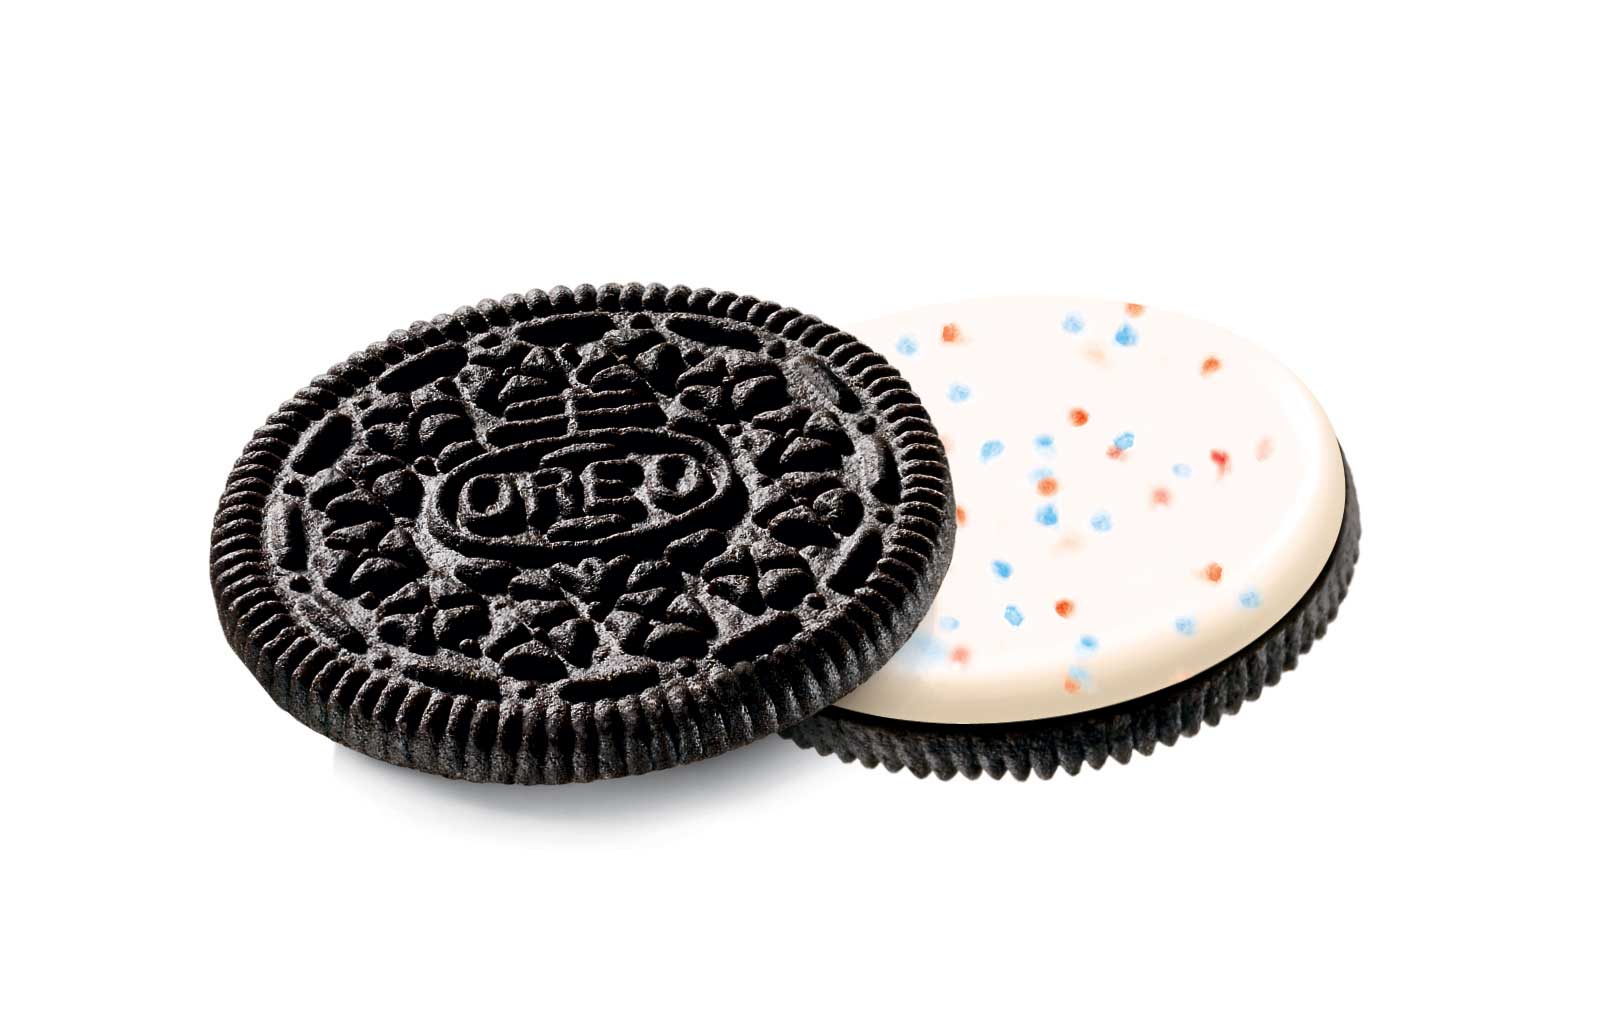 Featuring popping candy creme between two delicious chocolate wafers, Firework OREO cookies are the newest limited edition flavor creation from the OREO Wonder Vault.